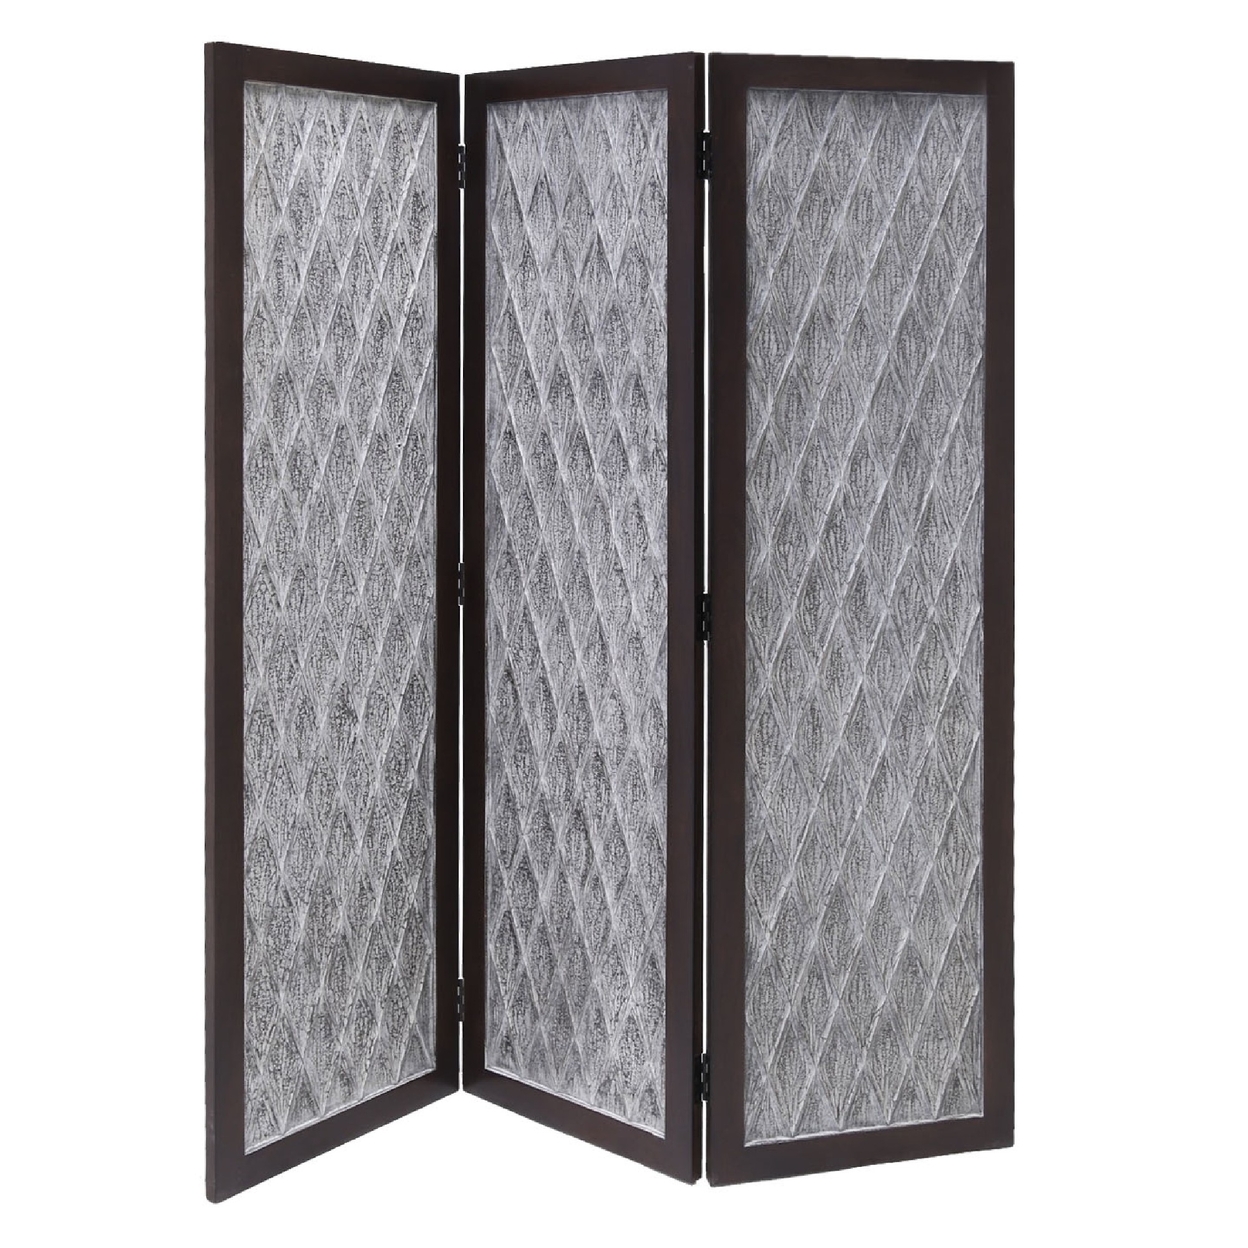 Wooden 3 Panel Room Divider With Textured Diamond Pattern, Gray And Black- Saltoro Sherpi